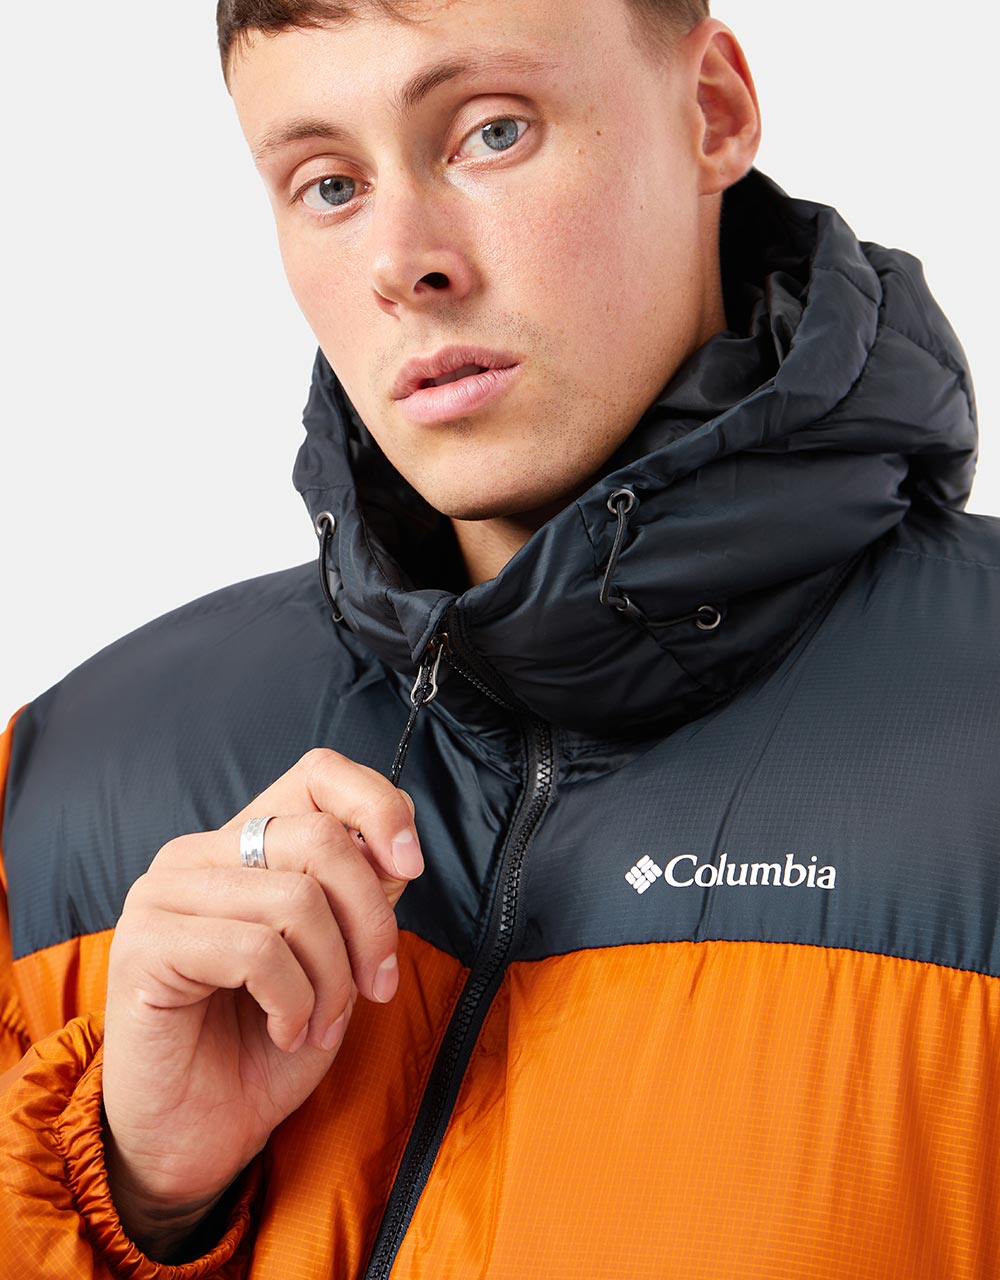 Columbia Puffect™ Hooded Jacket - Warm Copper/Black